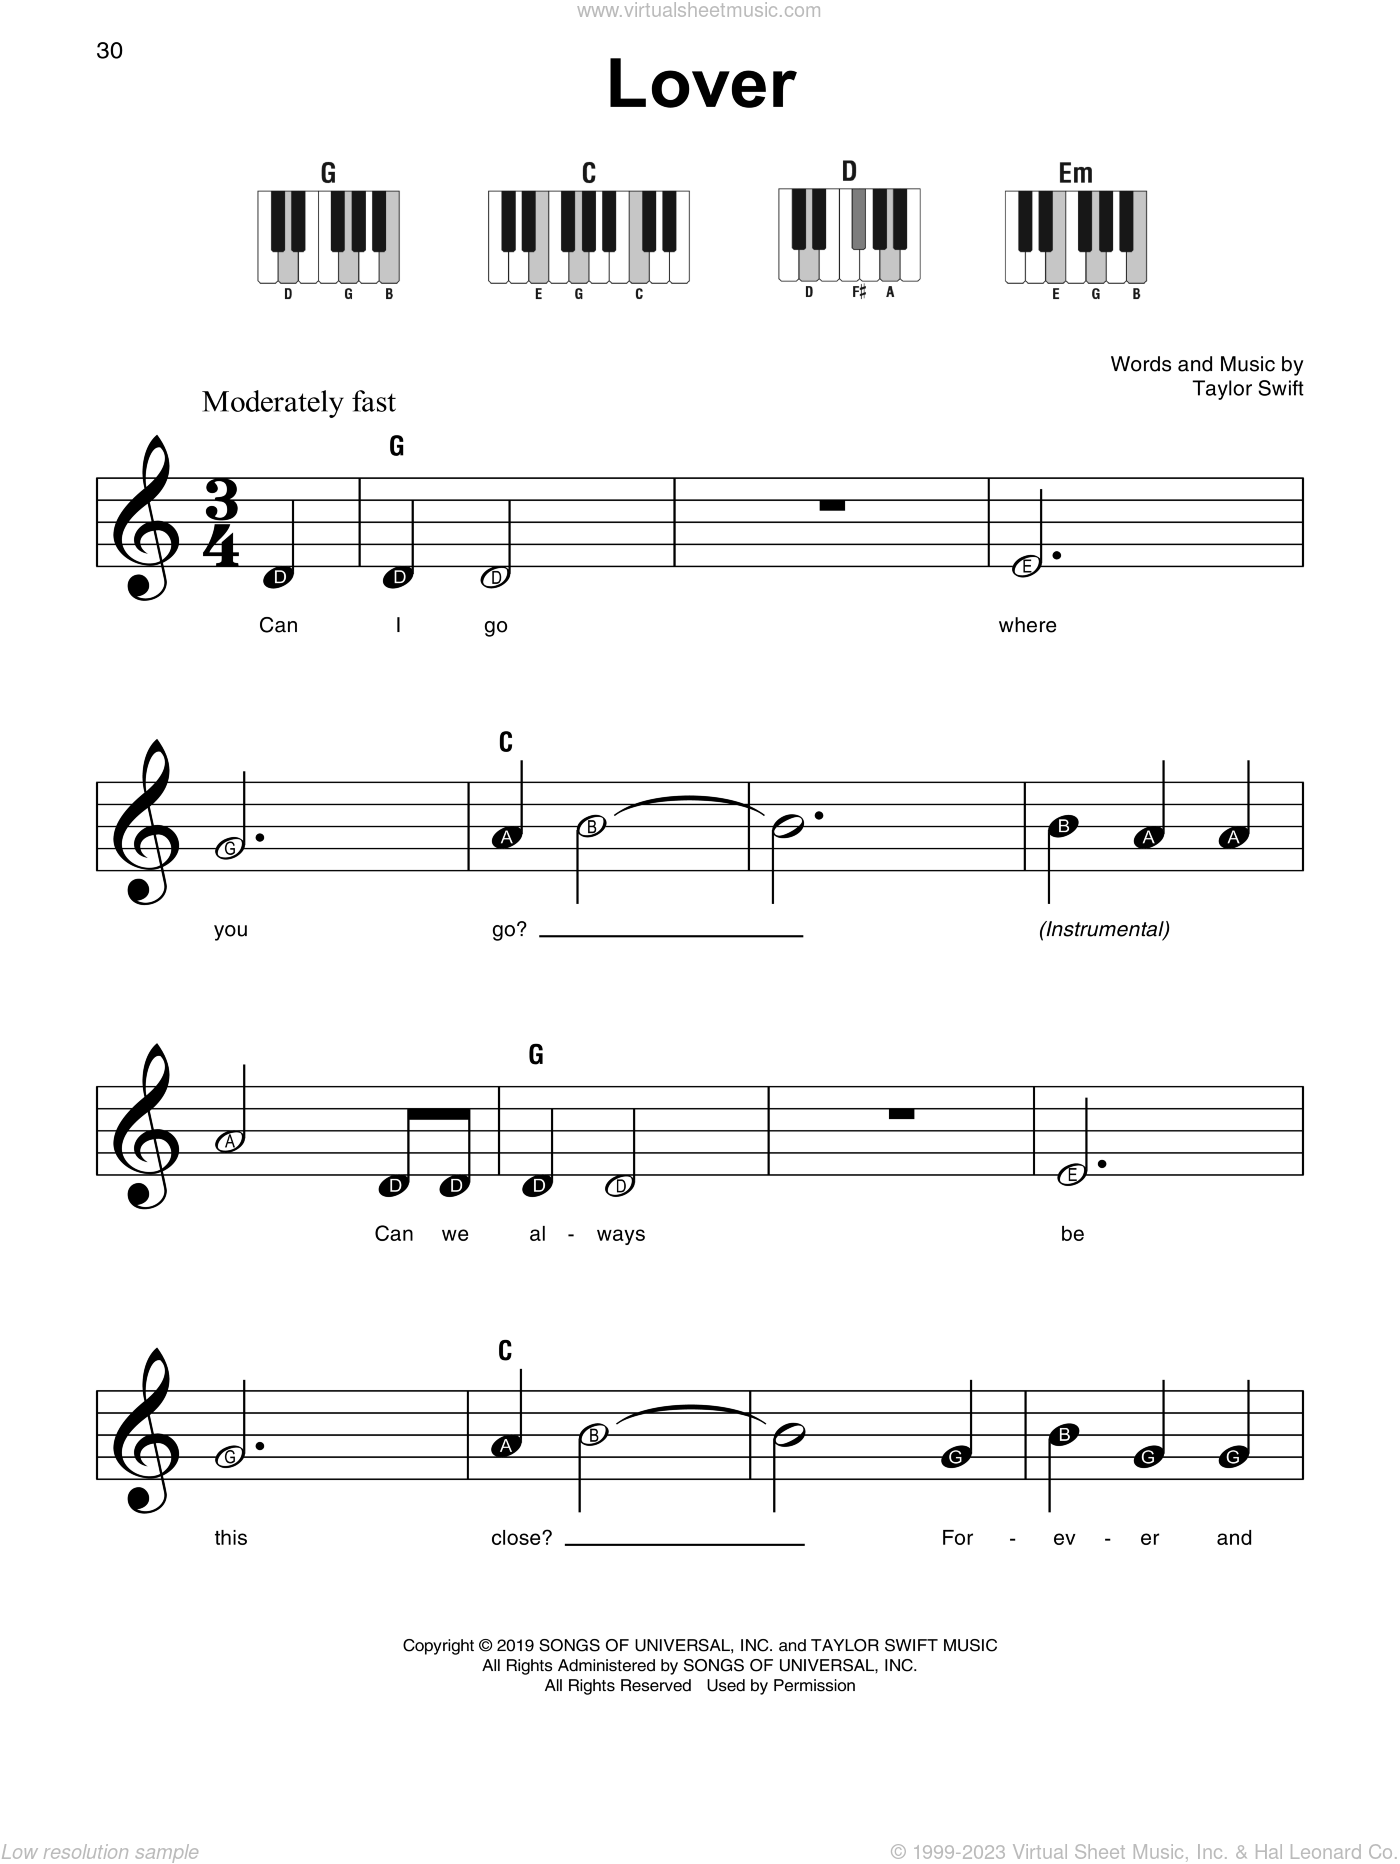 Swift - Lover sheet music for piano solo [PDF]